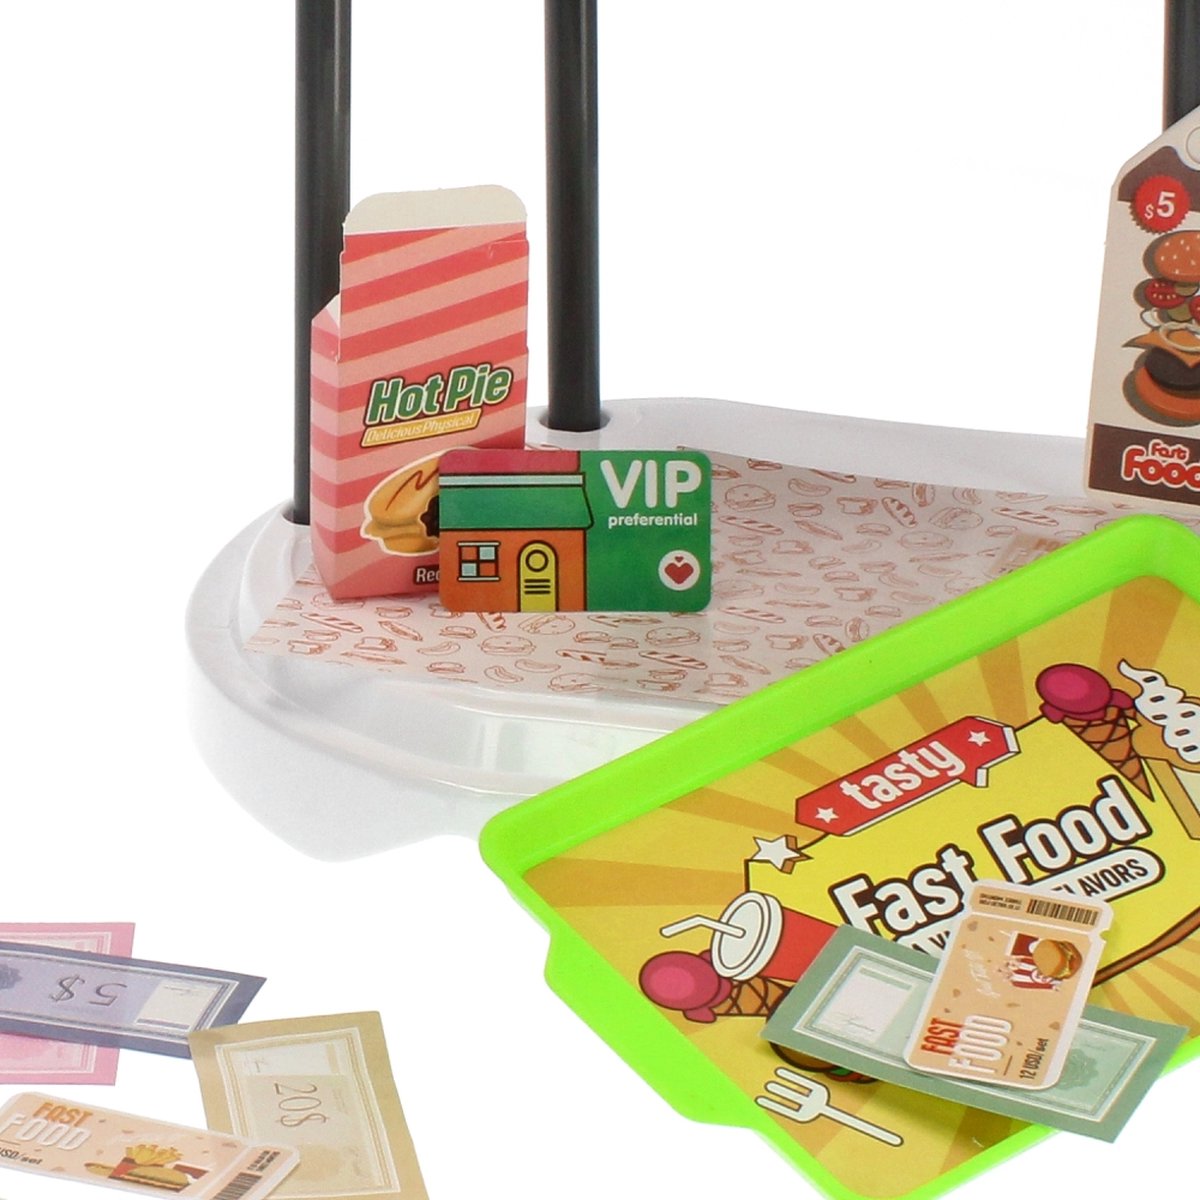 <tc>Ariko</tc>  Toy Suitcase Fast-food shop 58 pieces - hamburgers, popcorn, sauces, tongs and much more - handy take-along suitcase